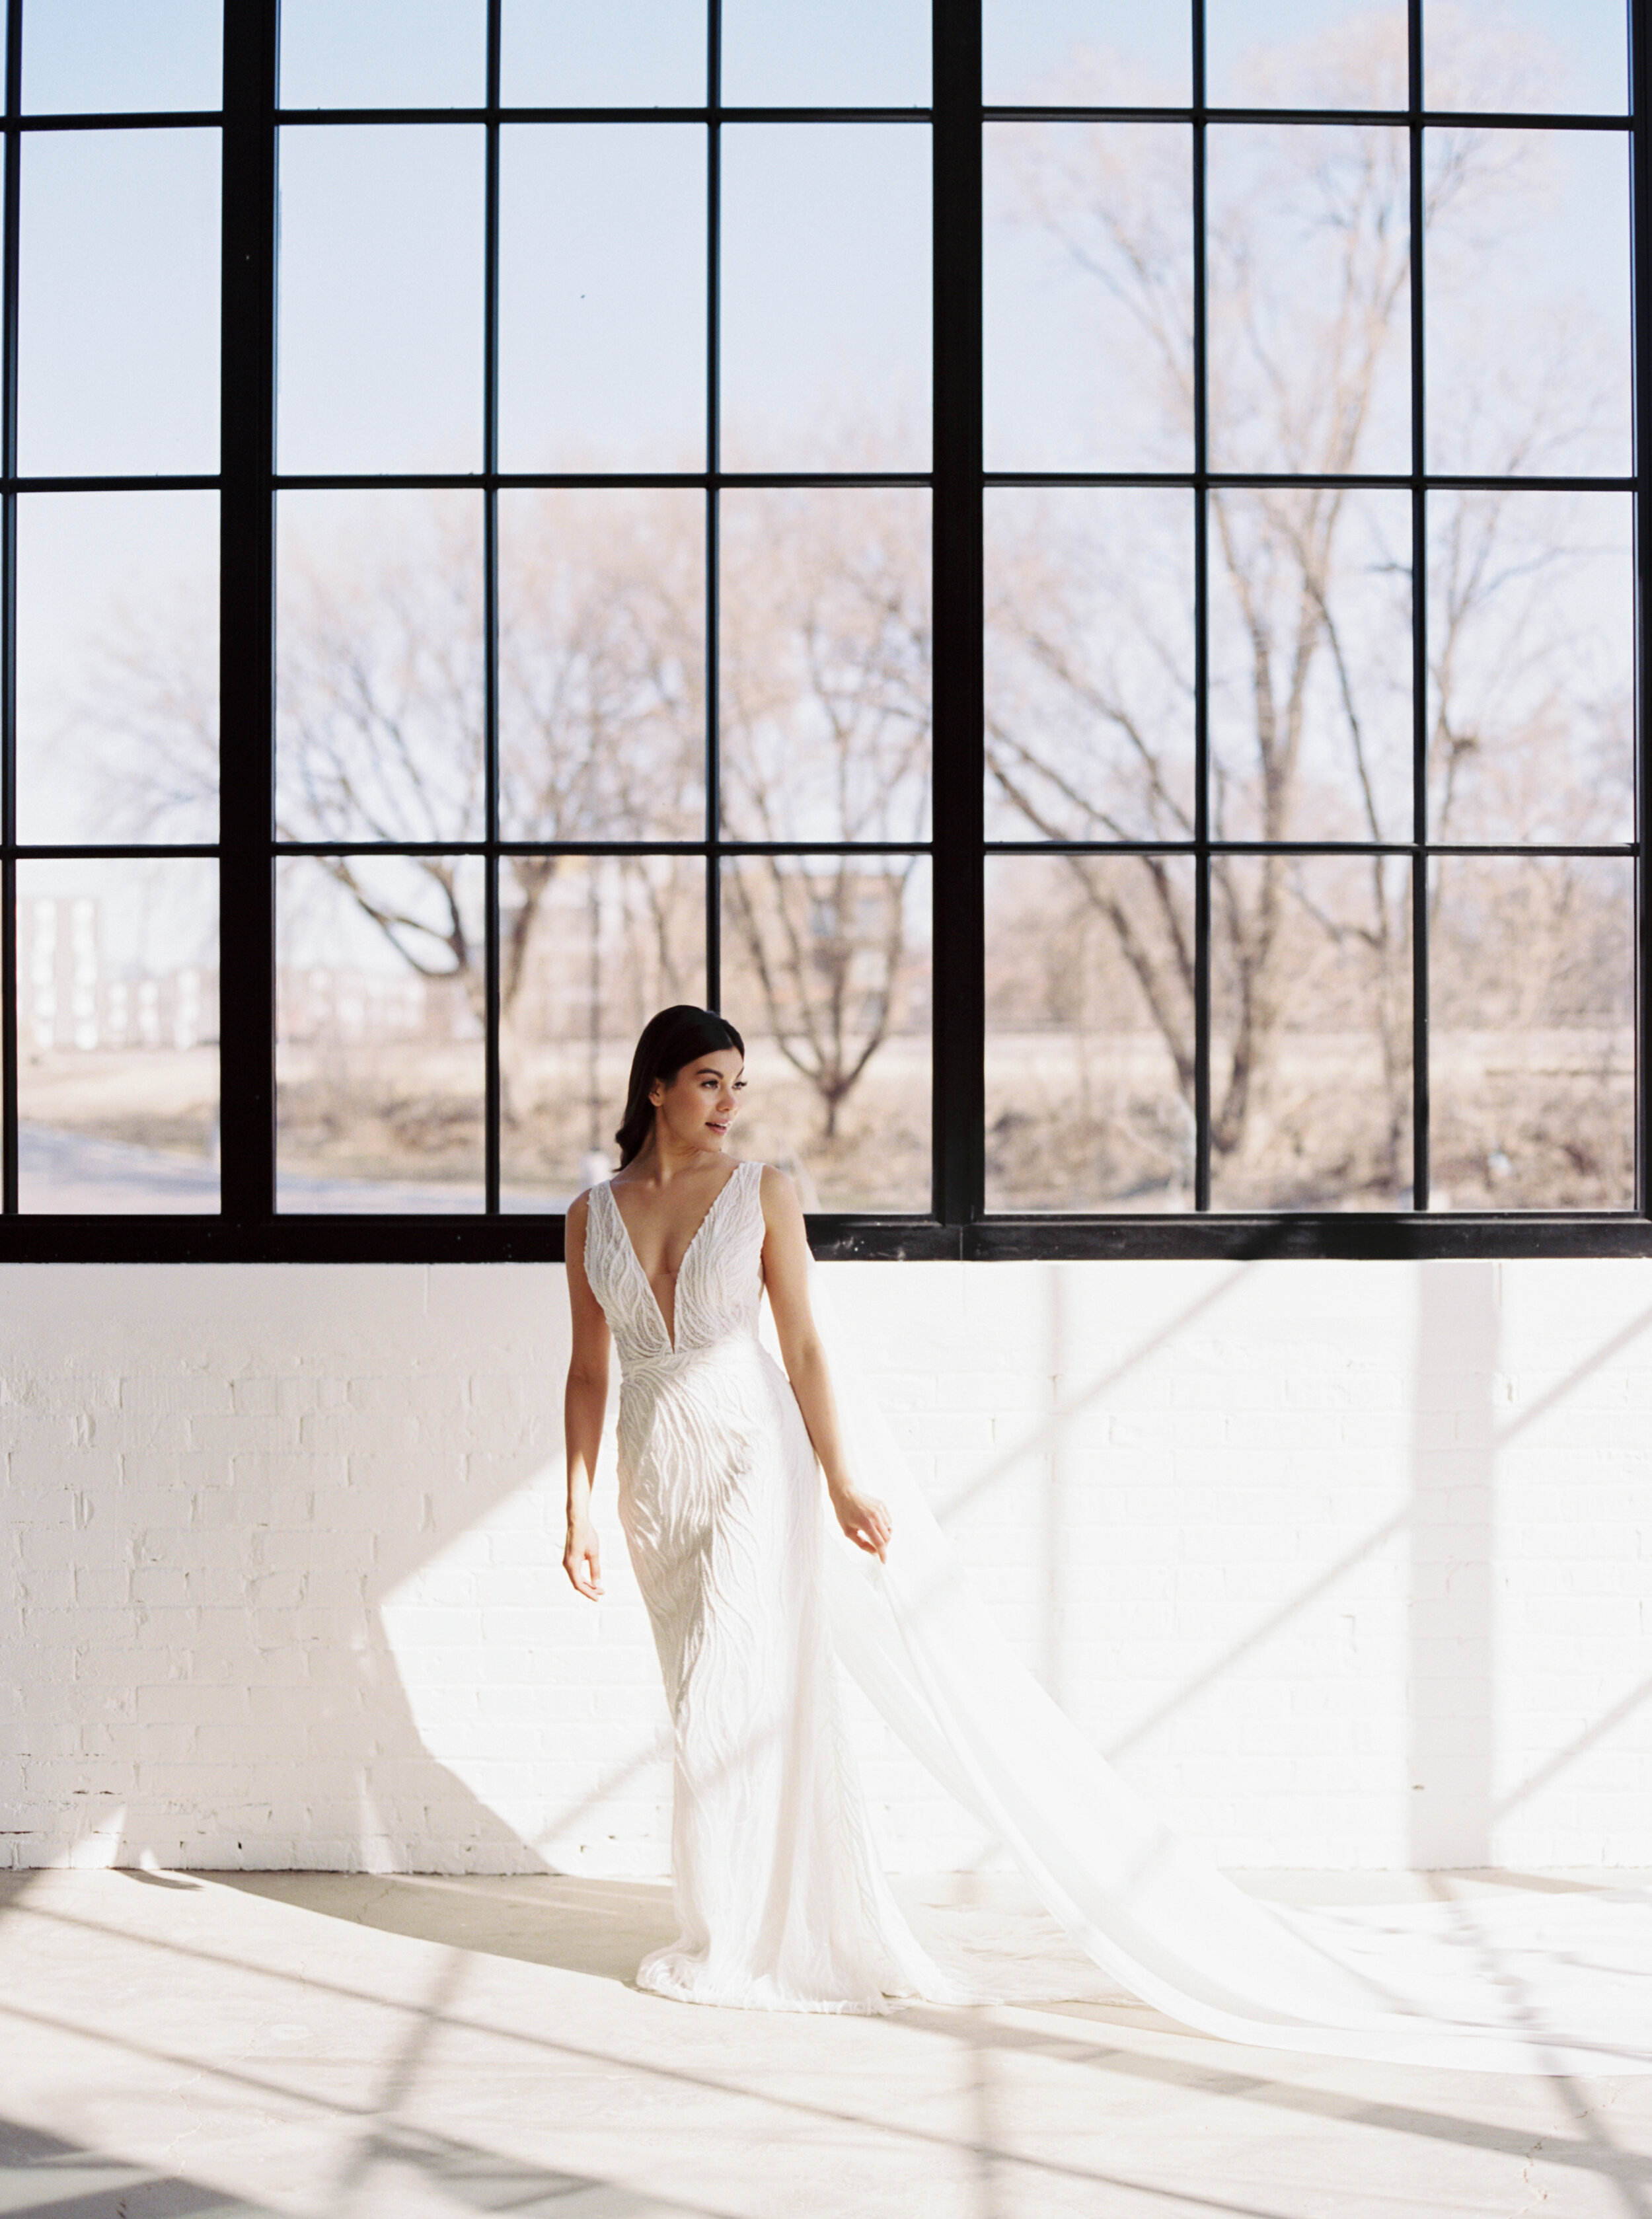  Made With Love Ryder Gown a&amp;be bridal shop Minneapolis 